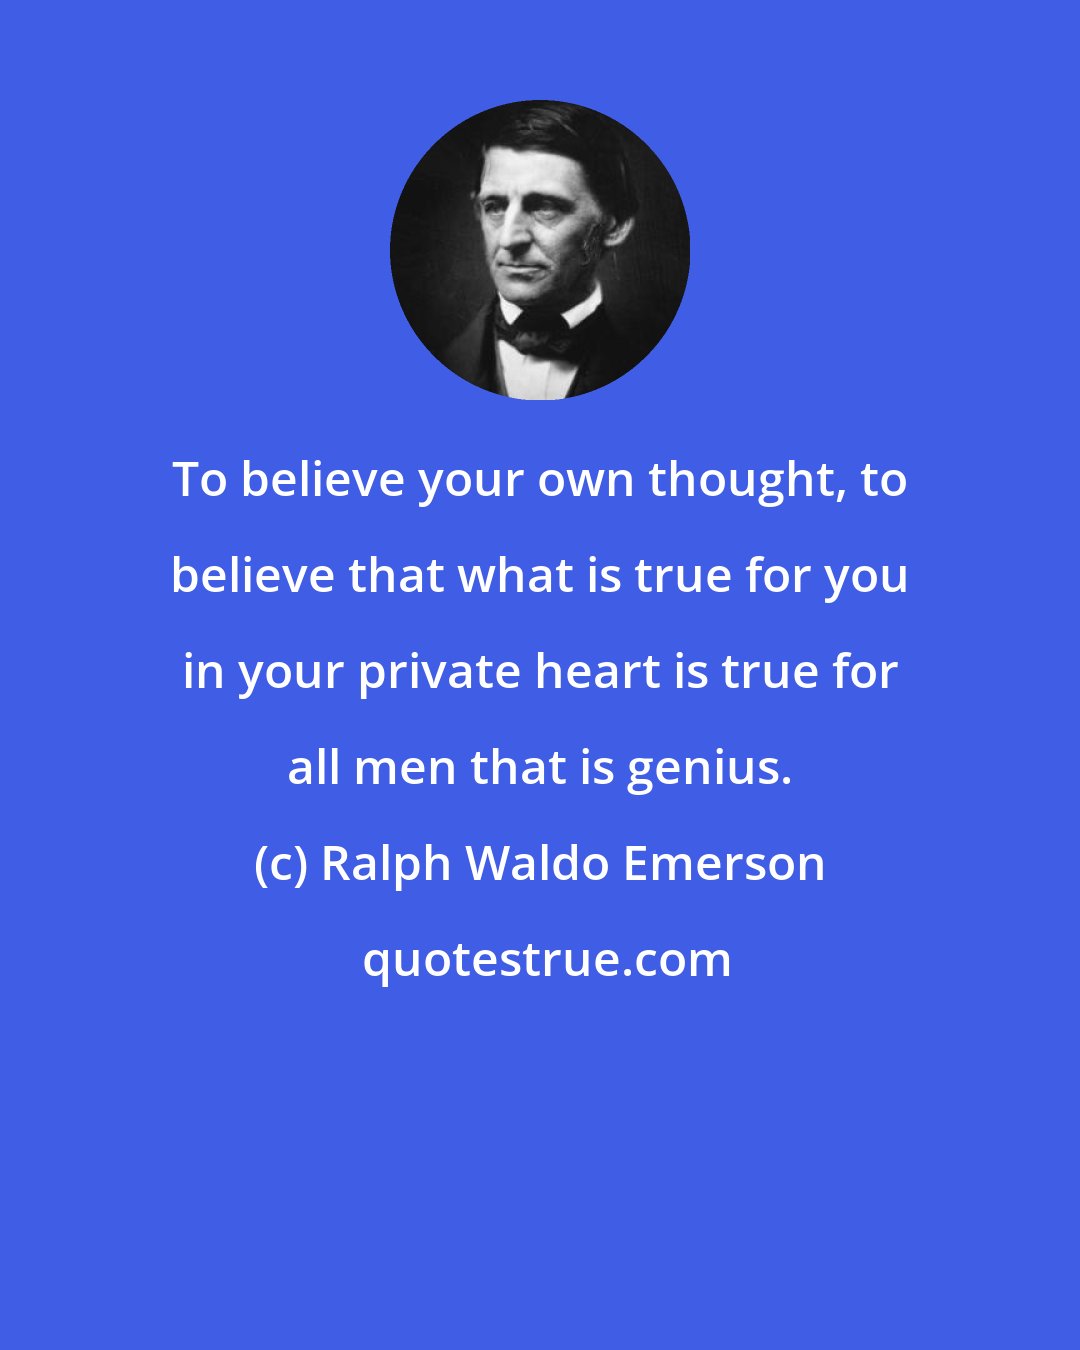 Ralph Waldo Emerson: To believe your own thought, to believe that what is true for you in your private heart is true for all men that is genius.